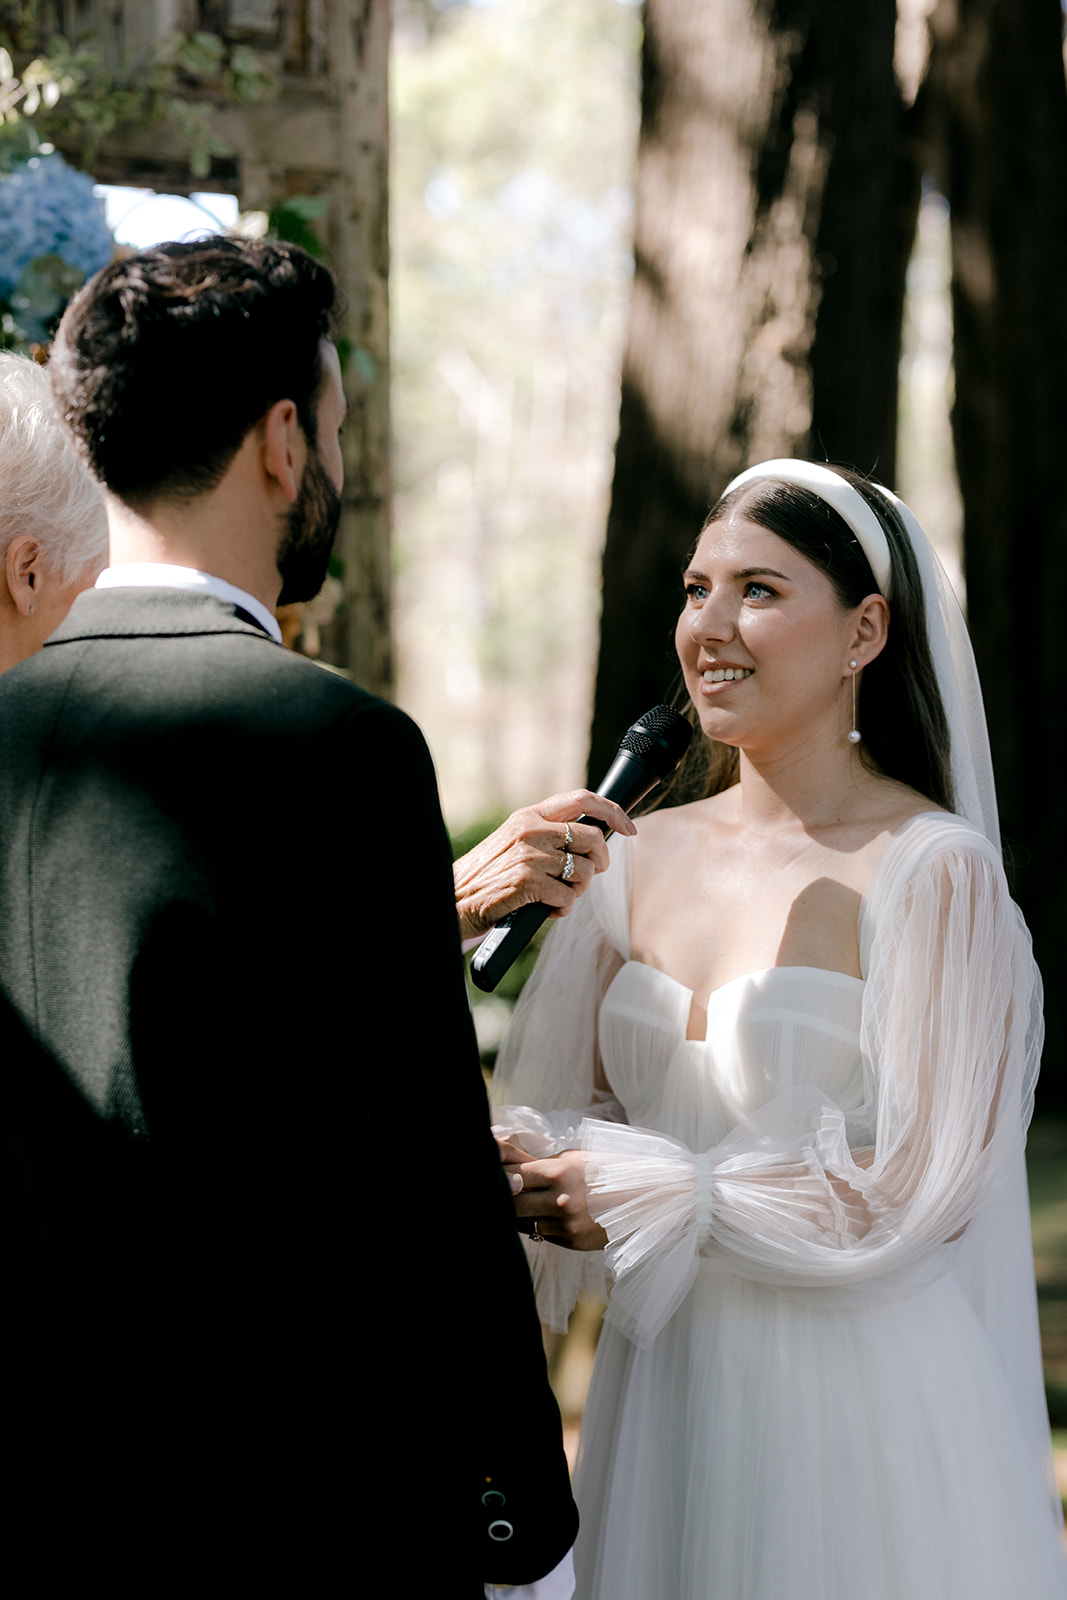 Portrait of bride & groom exchanging rings at their elegant country wedding ceremony.